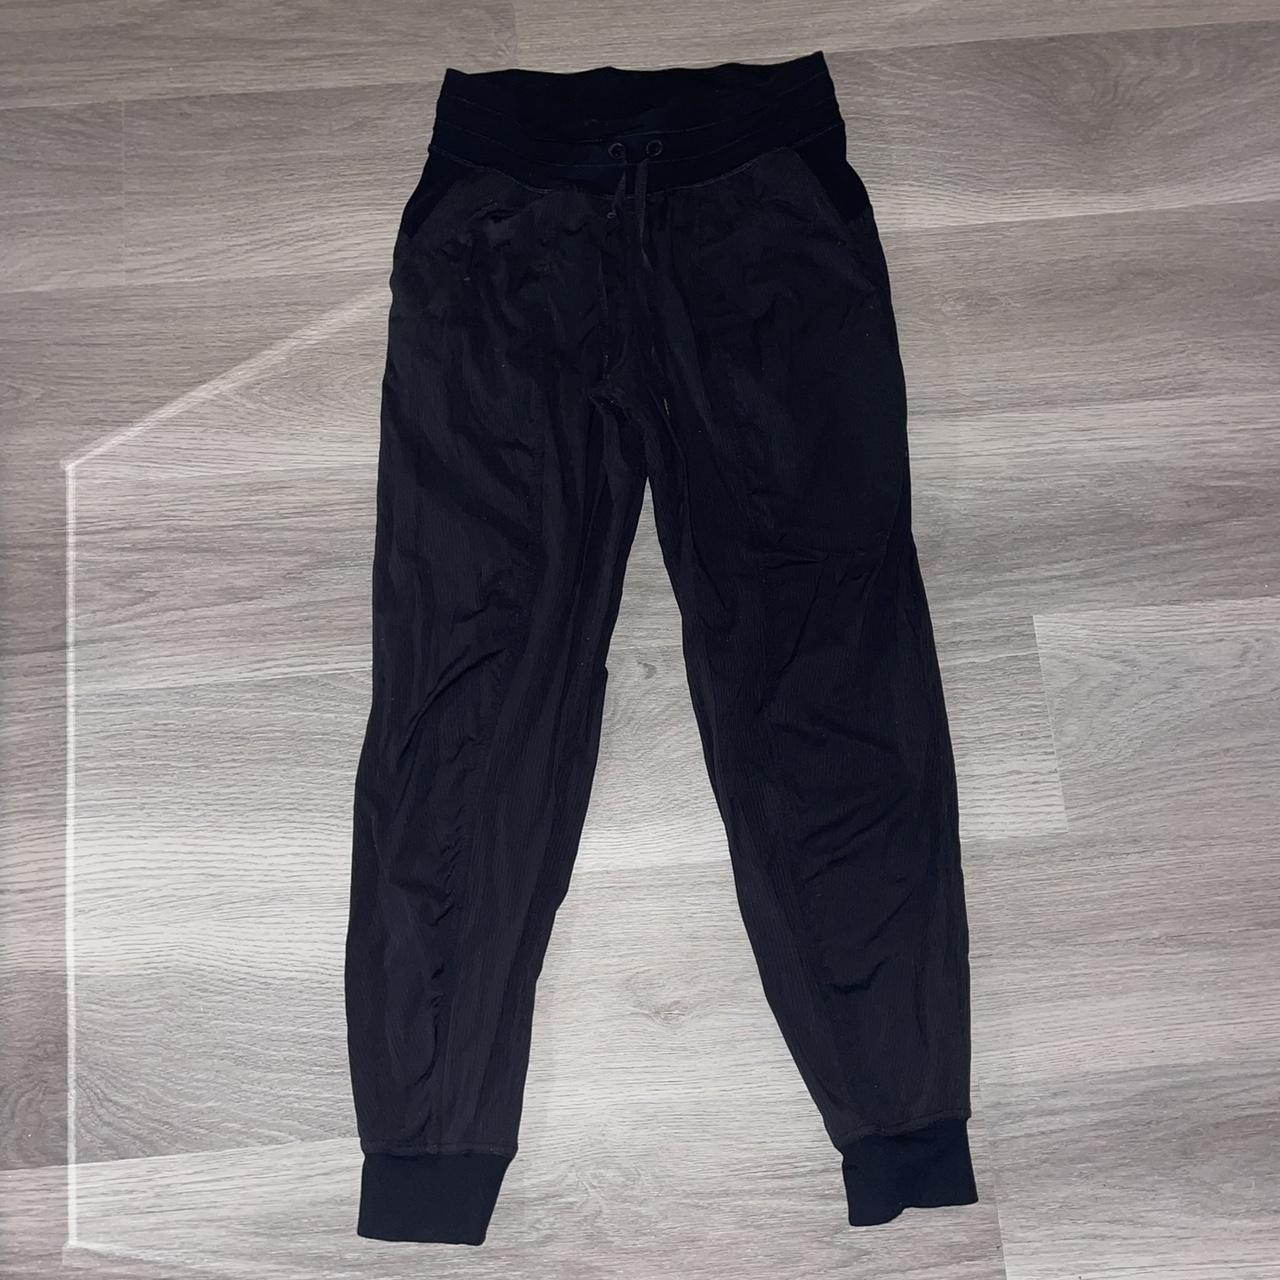 Lululemon Dance Joggers size 6 almost perfect (very - Depop